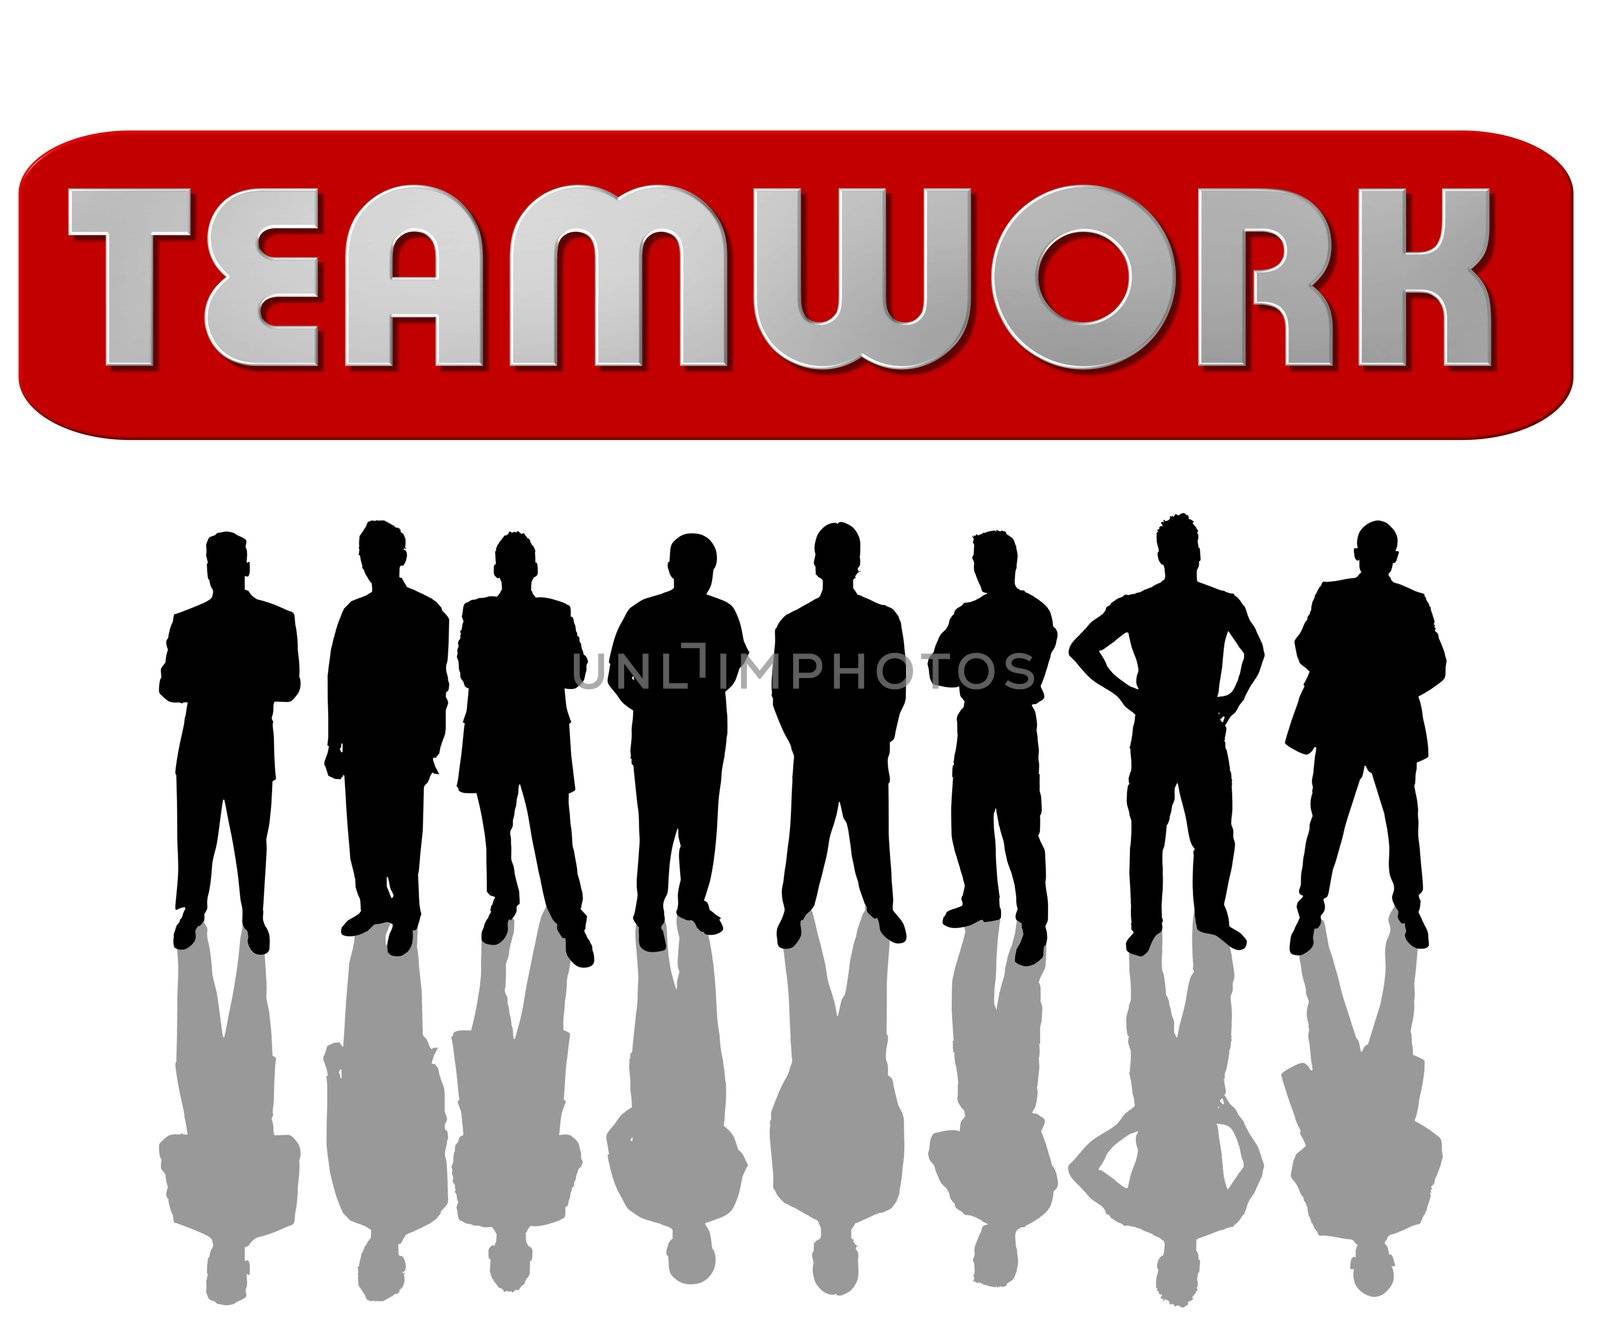 illustration of a group of business people – teamwork by peromarketing